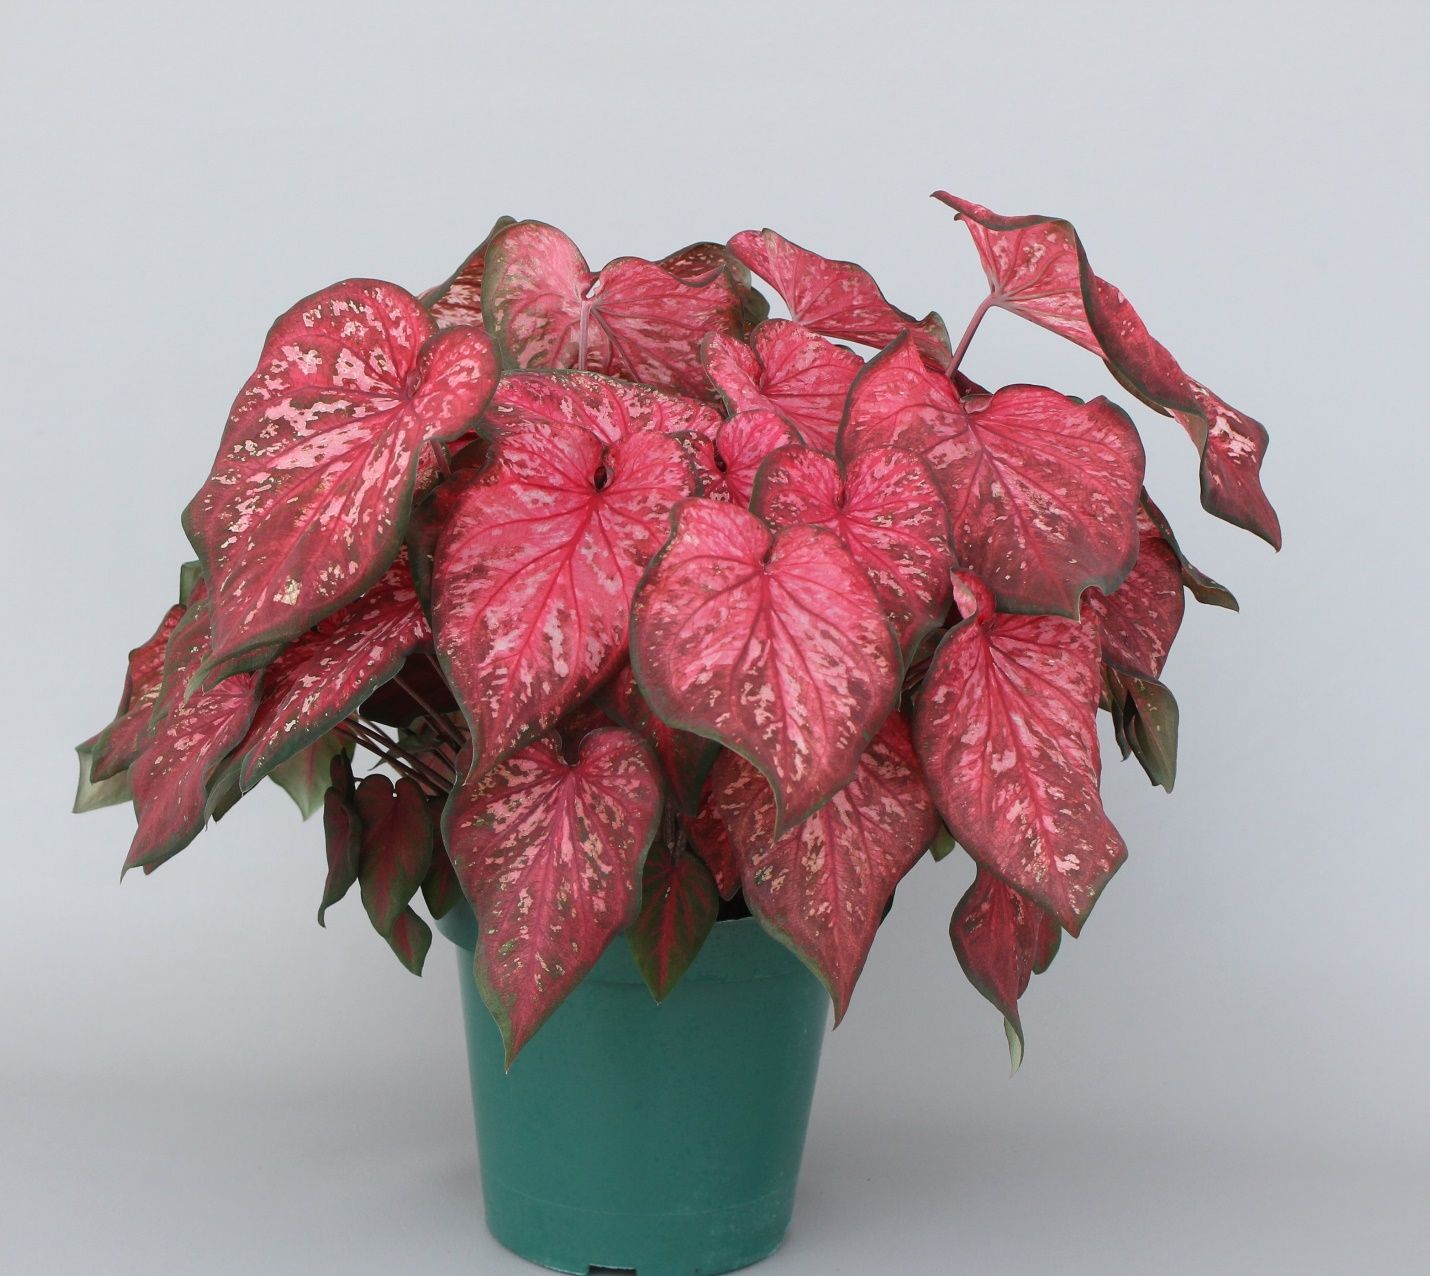 A typical plant of ‘Crimson Skye’ caladium (35 days old) forced from four No.1 tubers in an 8-inch container. 